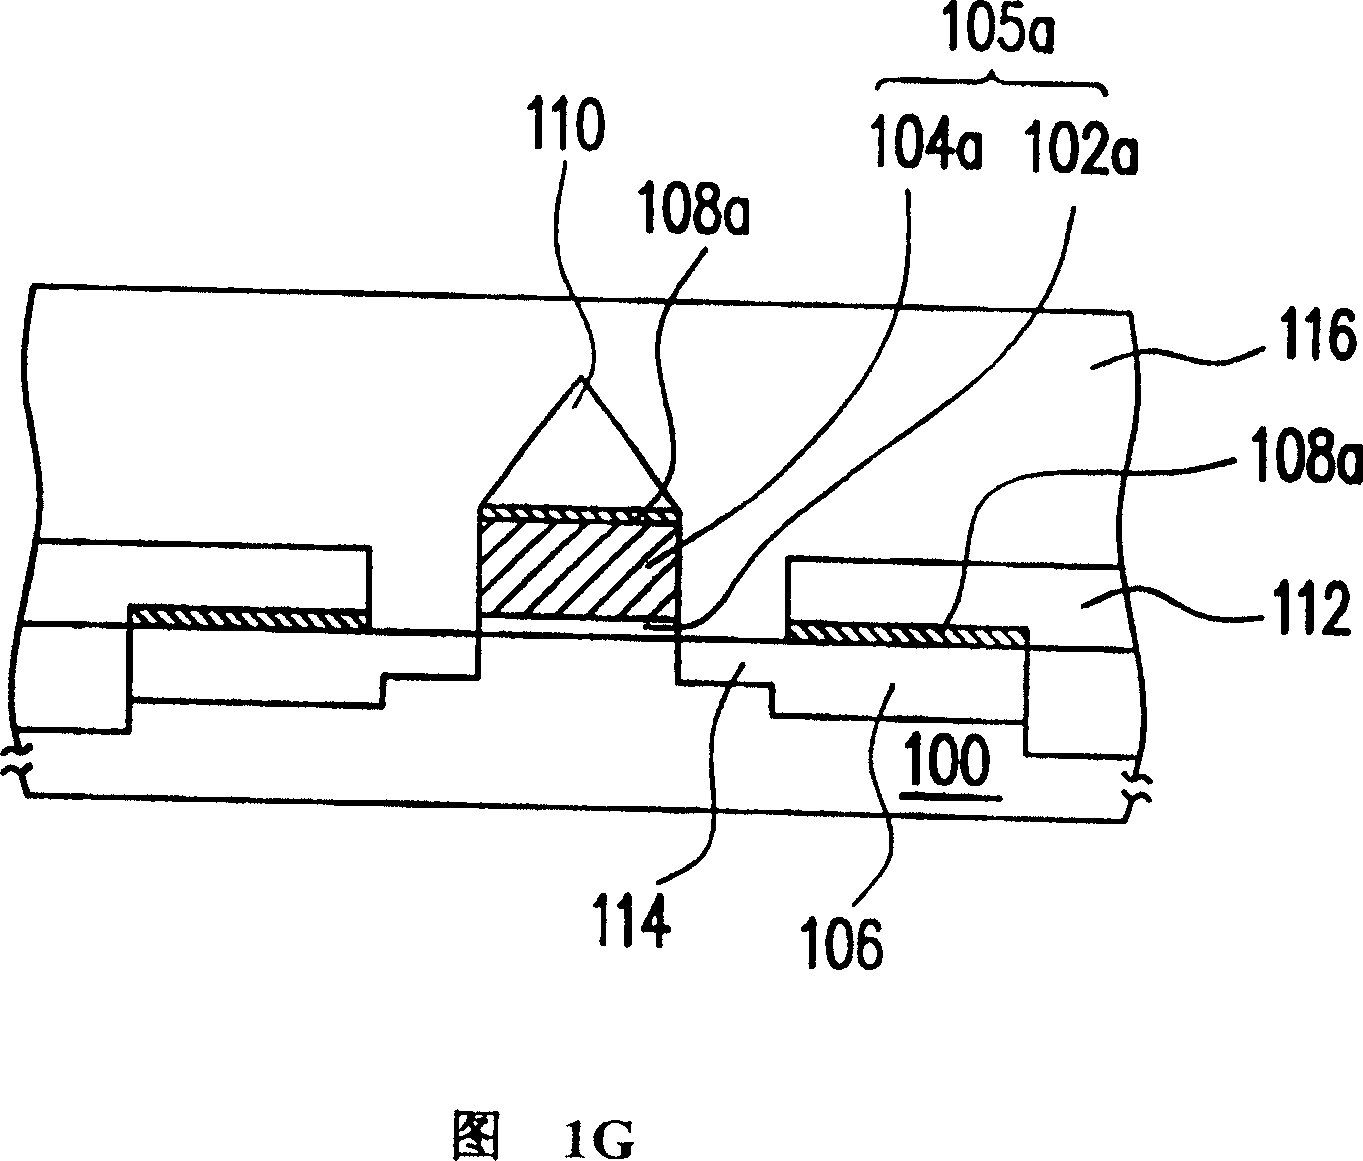 Method for fabricating a mosfet and reducing line width of gate structure